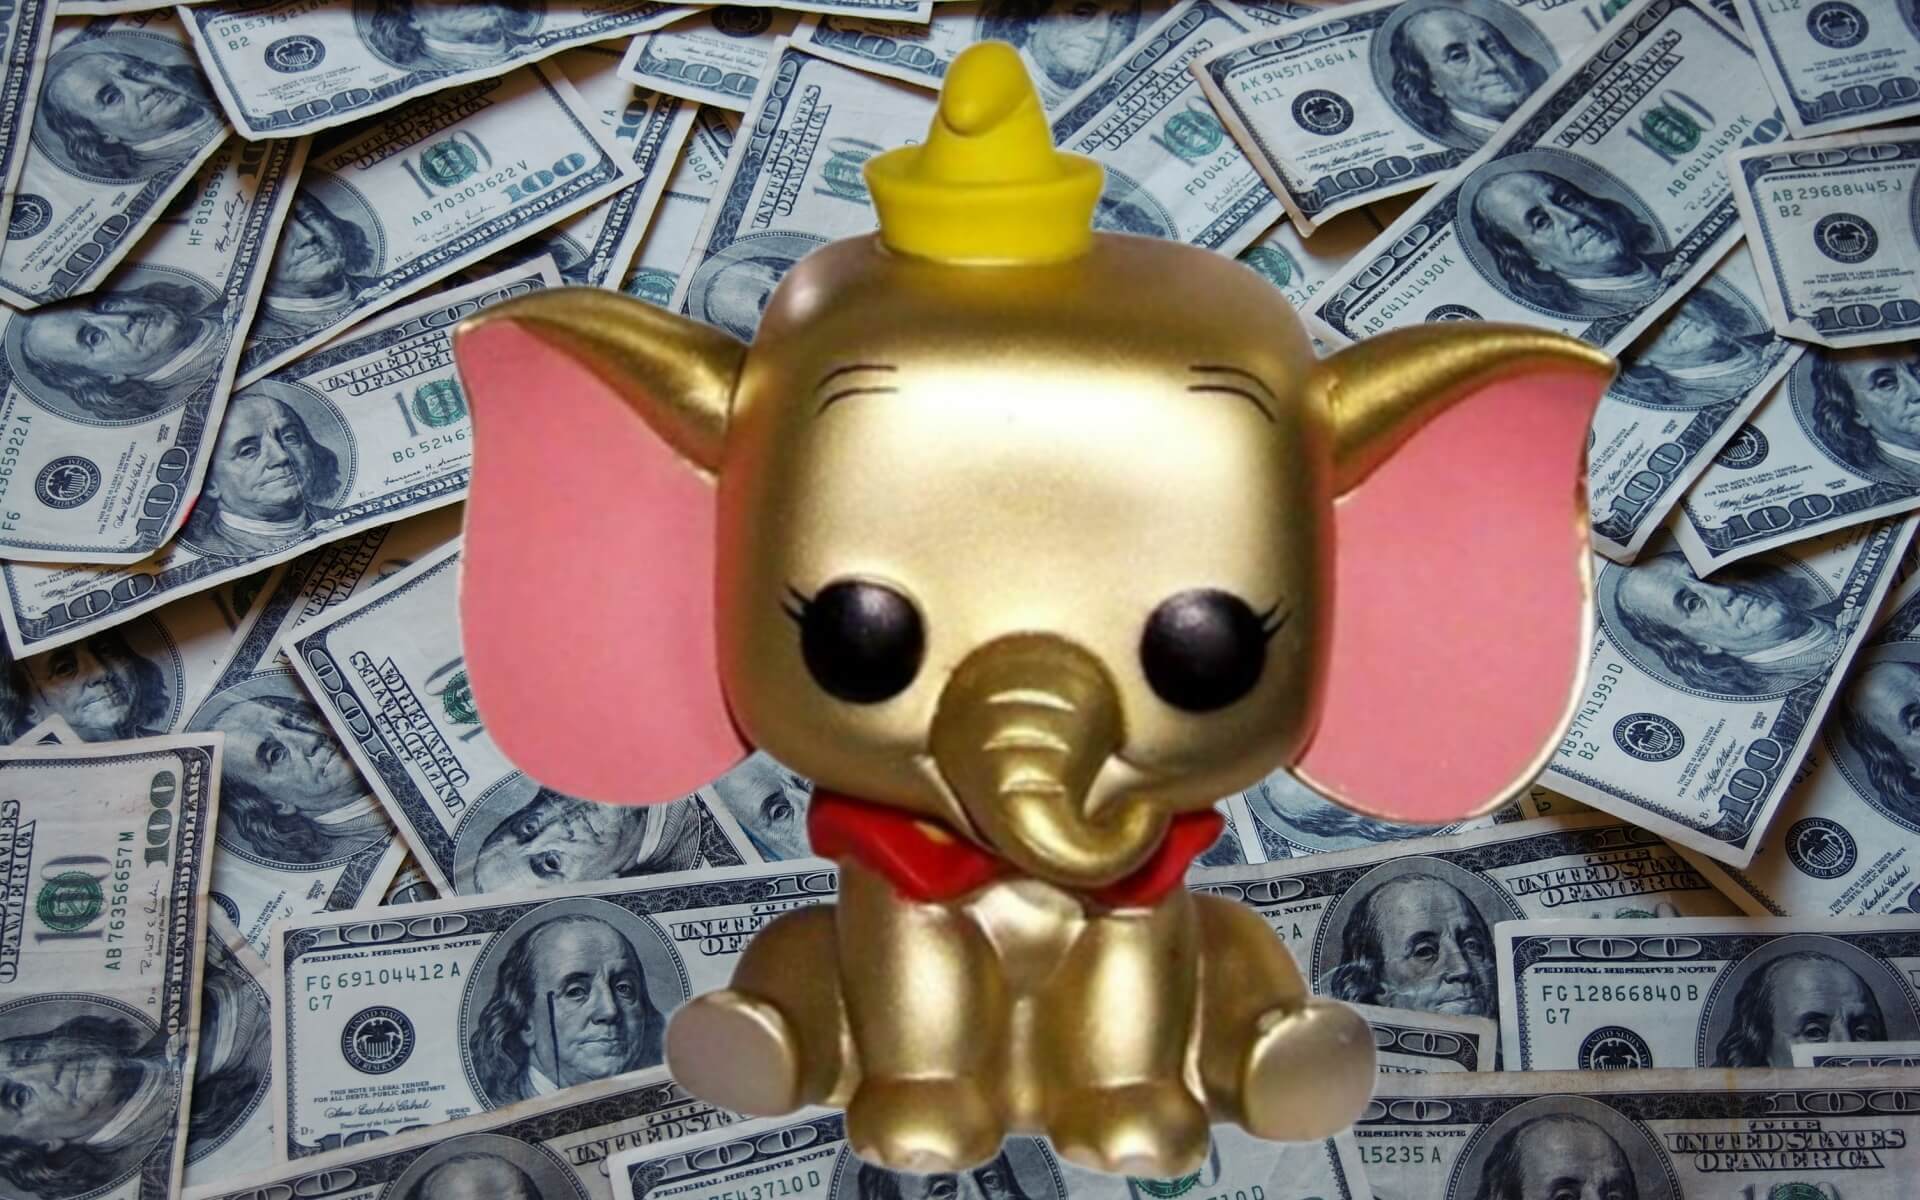 How much is a Dumbo Gold Face Funko Pop worth?